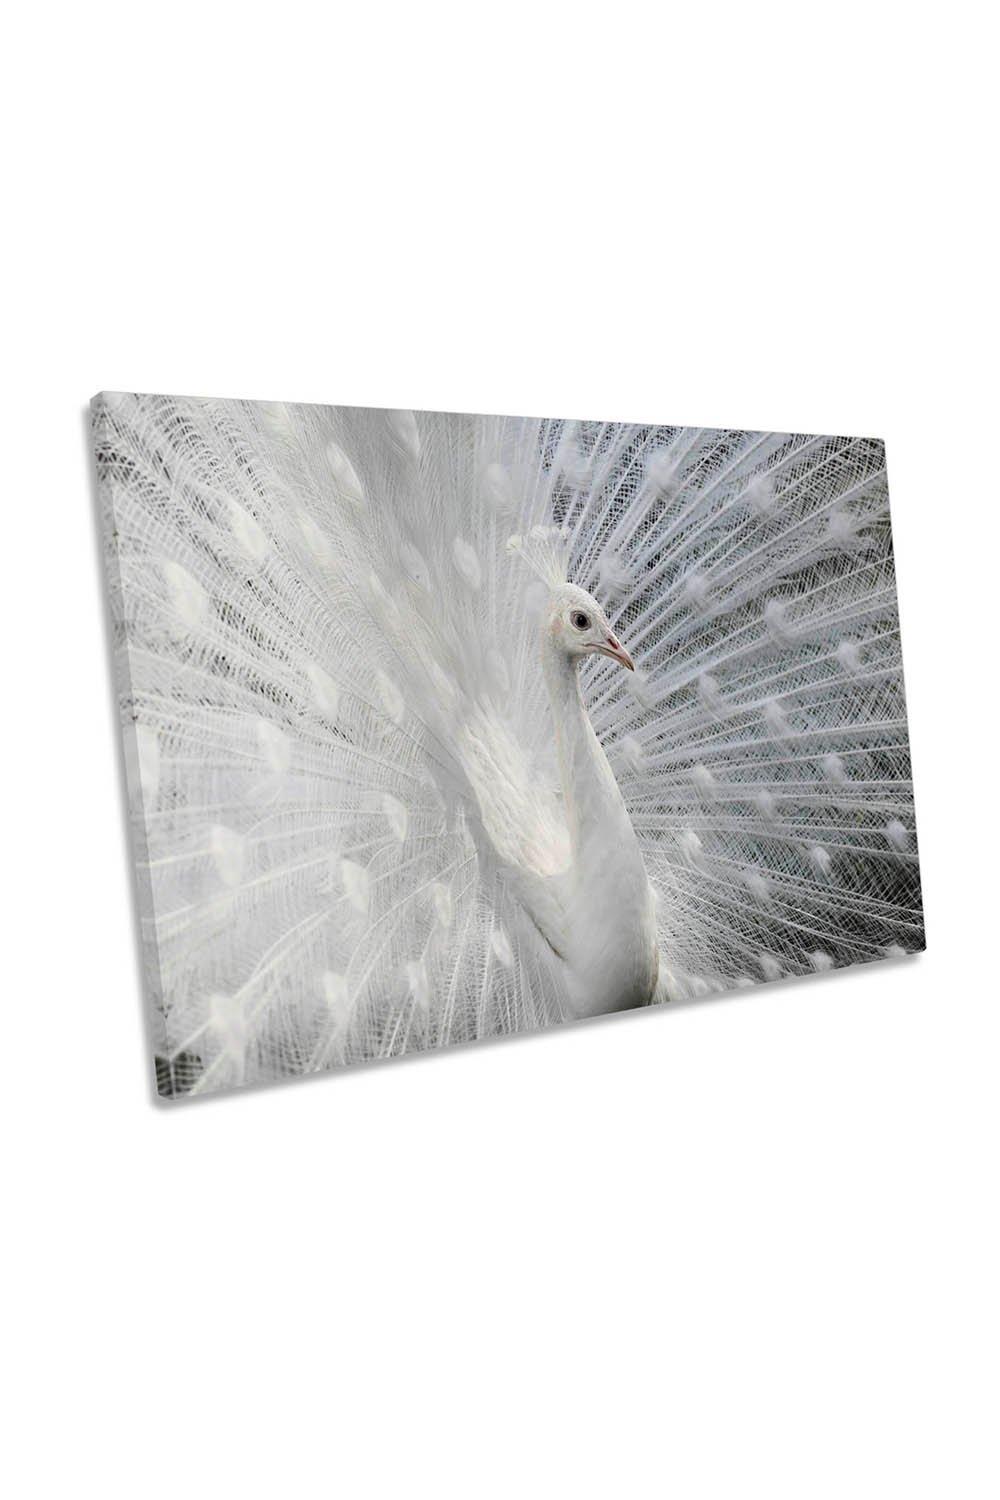 White Peacock Feathers Canvas Wall Art Picture Print